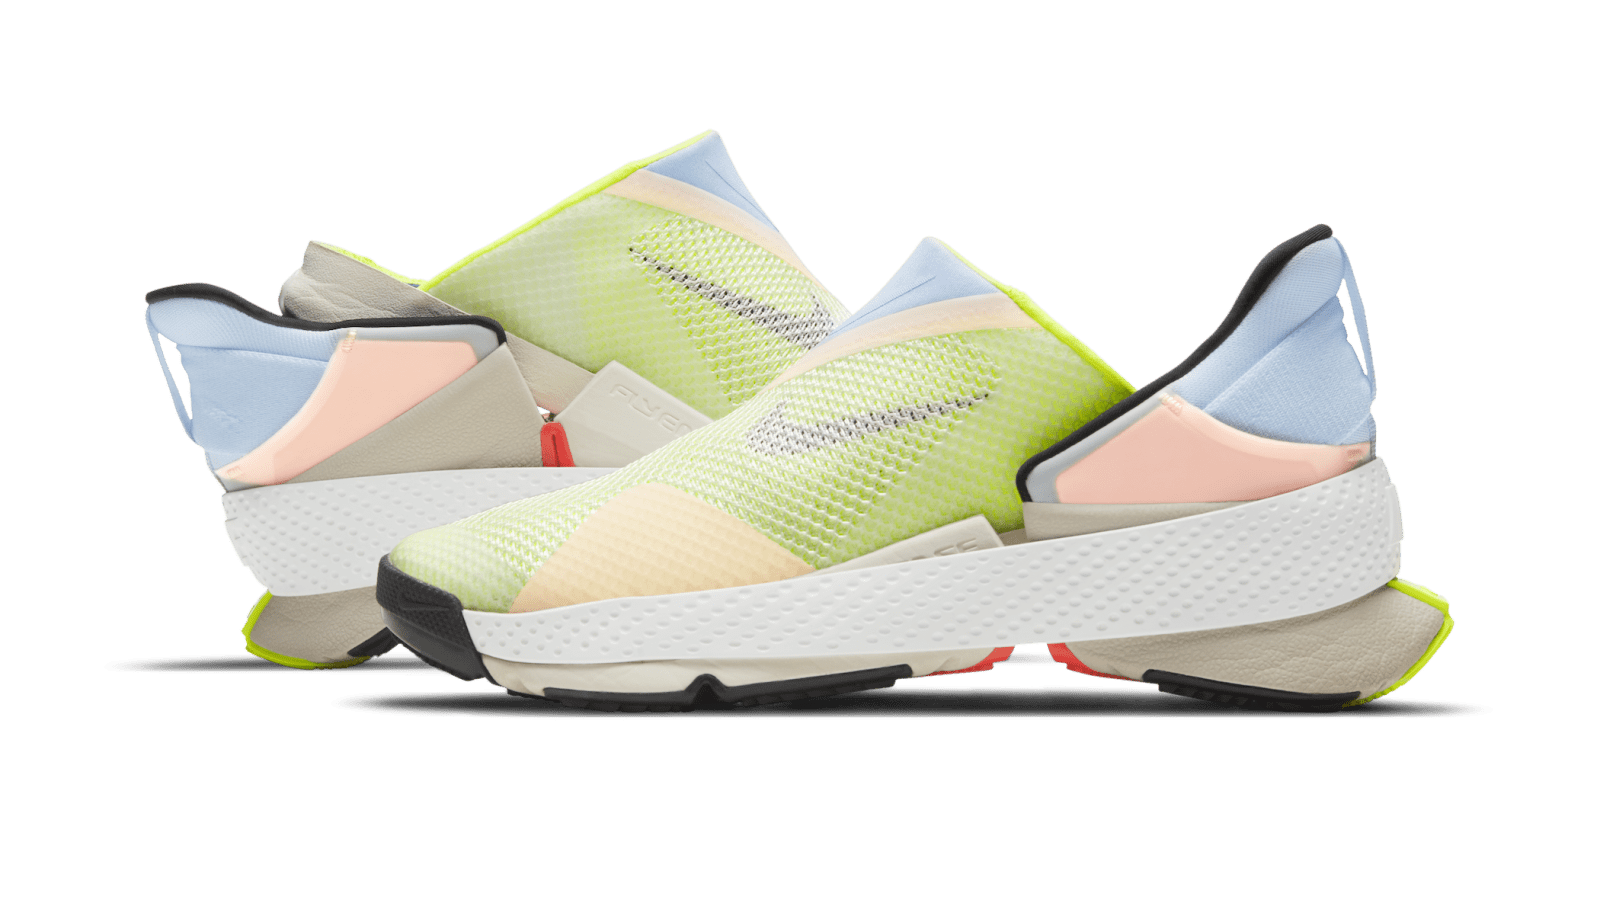 Drive away Derive baggage Nike to launch Go FlyEase, a no-lace slip-on sneaker